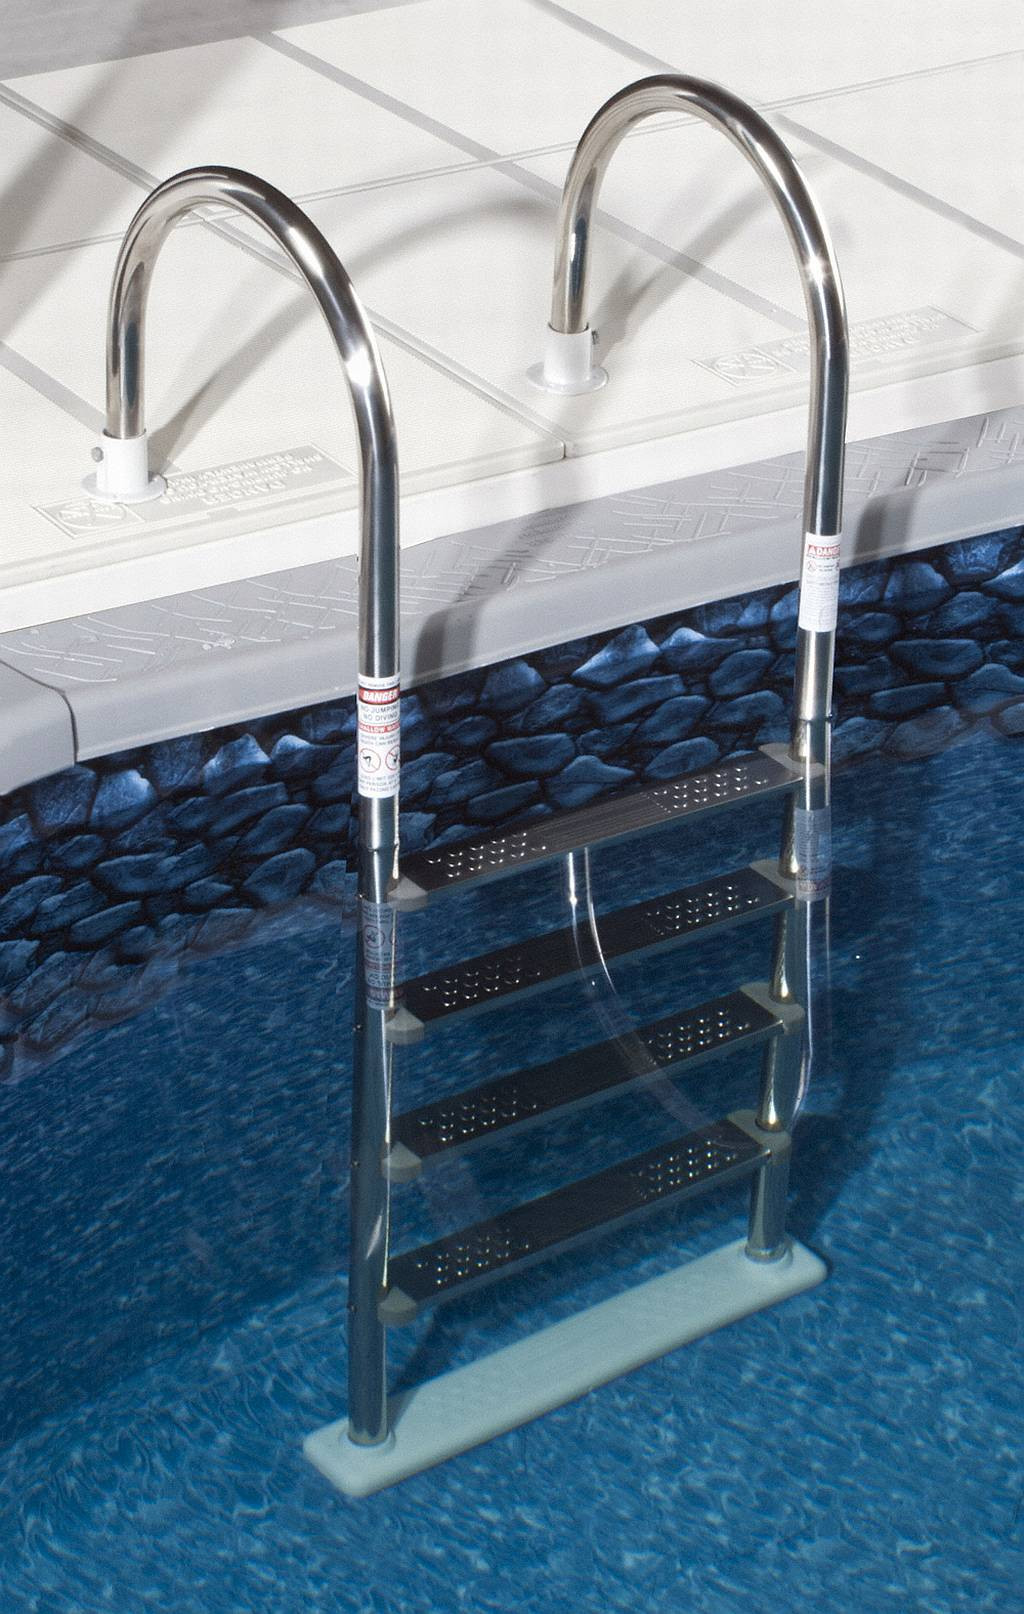 Swimming Pool Stairs Above Ground
 Ground Super Stainless Steel In Pool Ladder NE1145